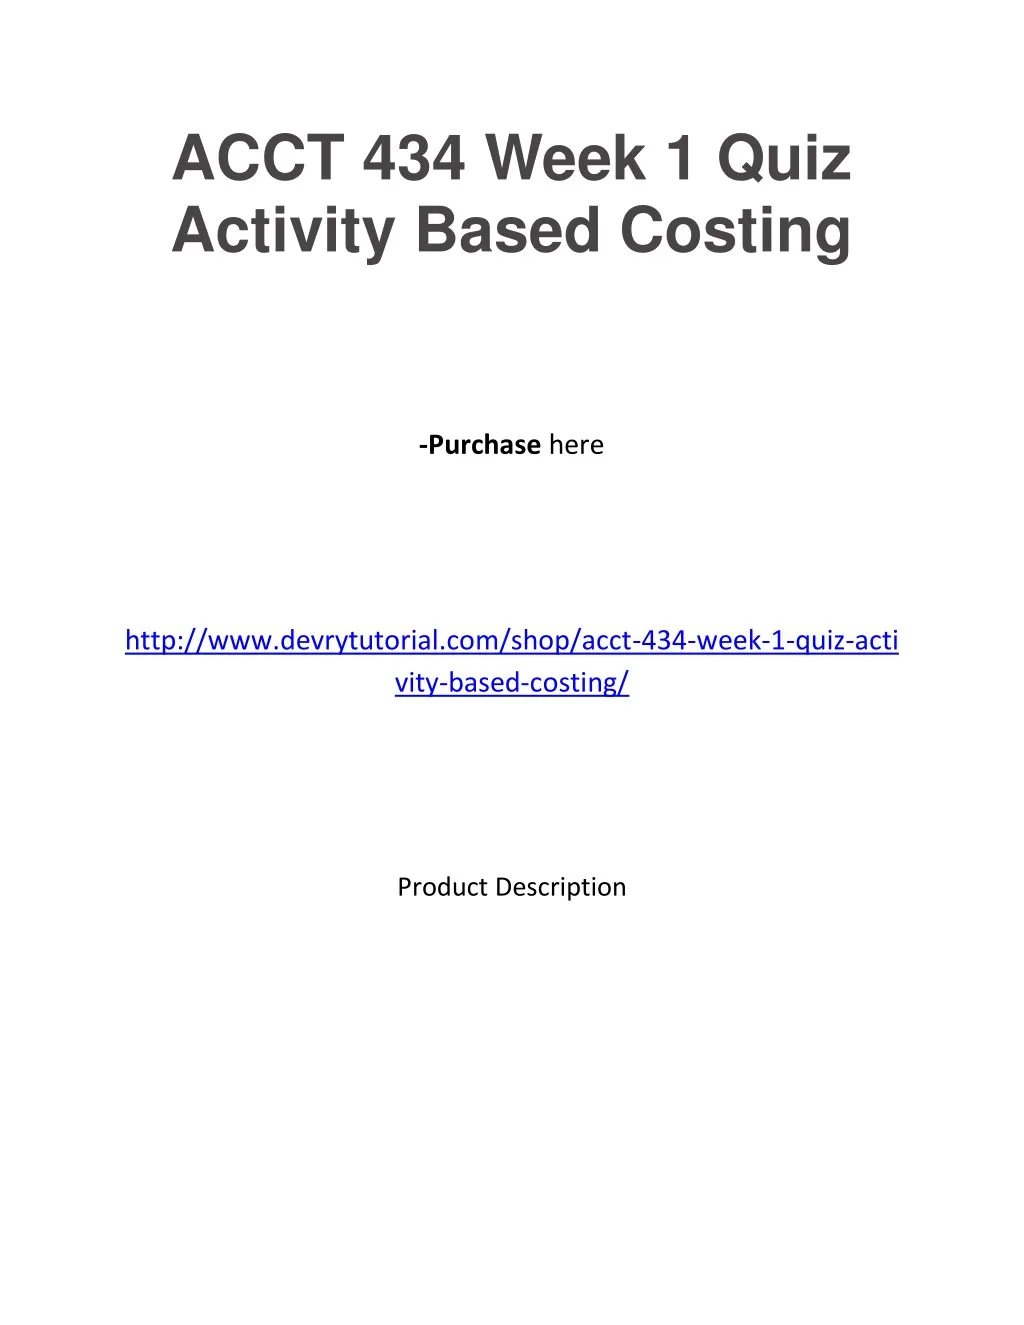 acct 434 week 1 quiz activity based costing